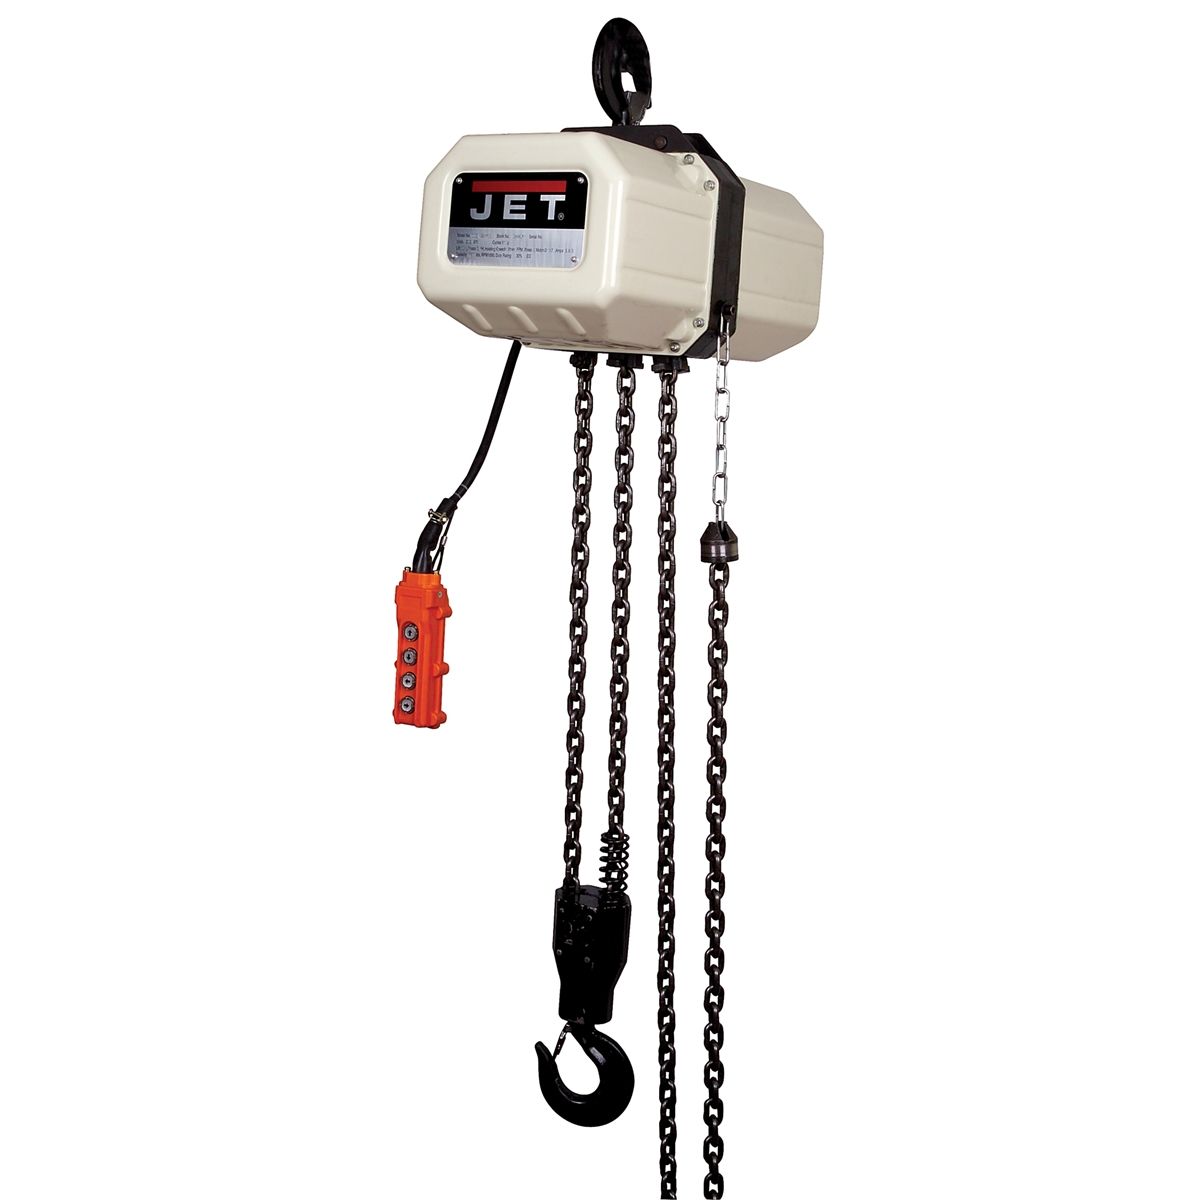 5SS-1C-15 5 Ton Electric Hoist with 15' Lift, 115/230V